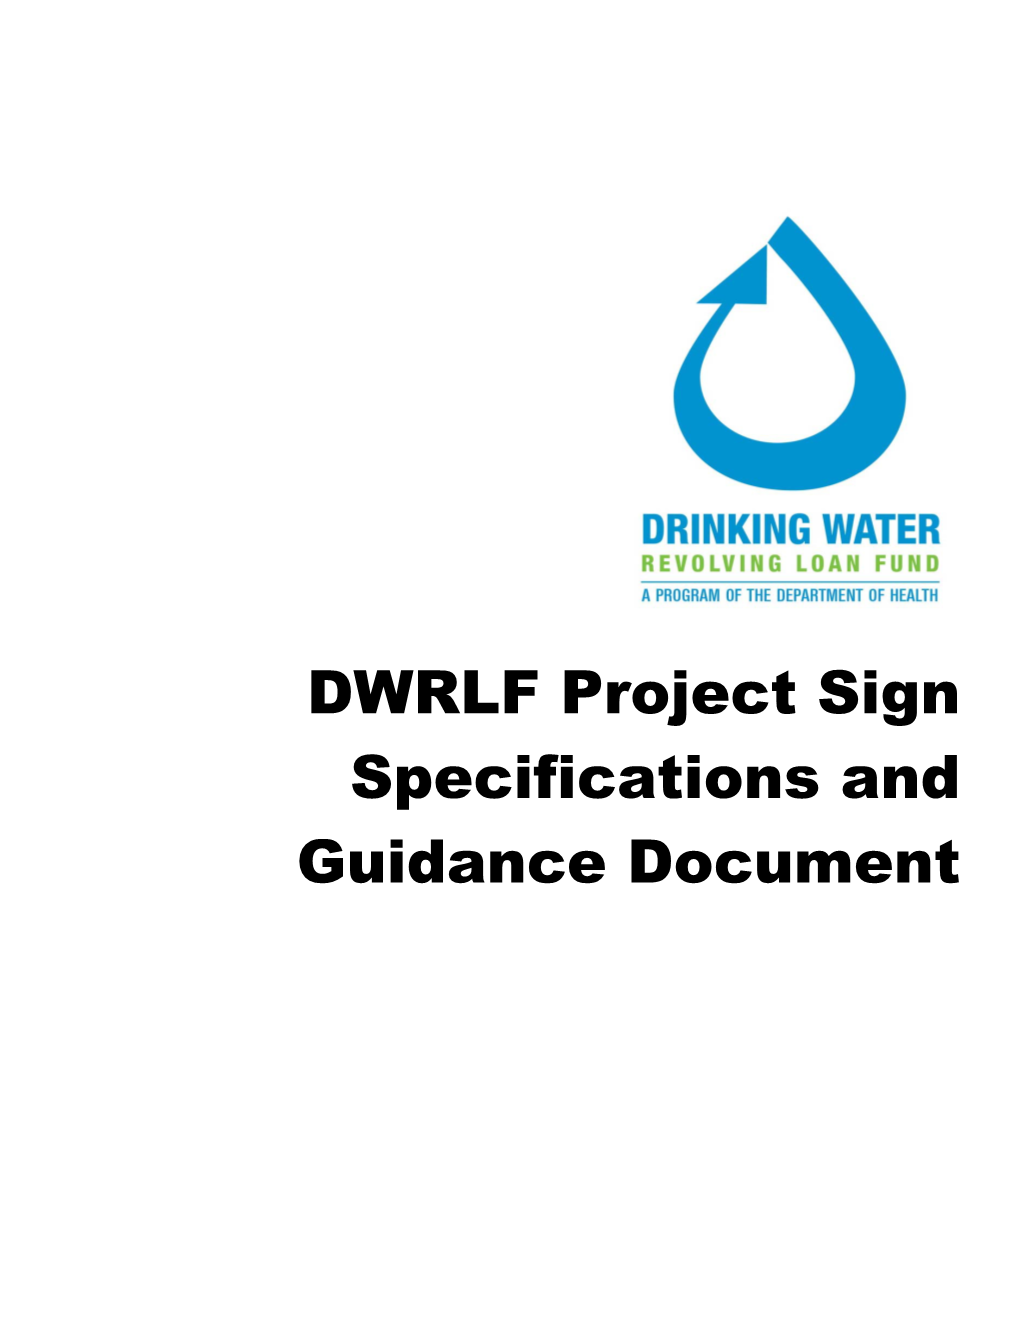 DWRLF Project Sign Specifications and Guidance Document